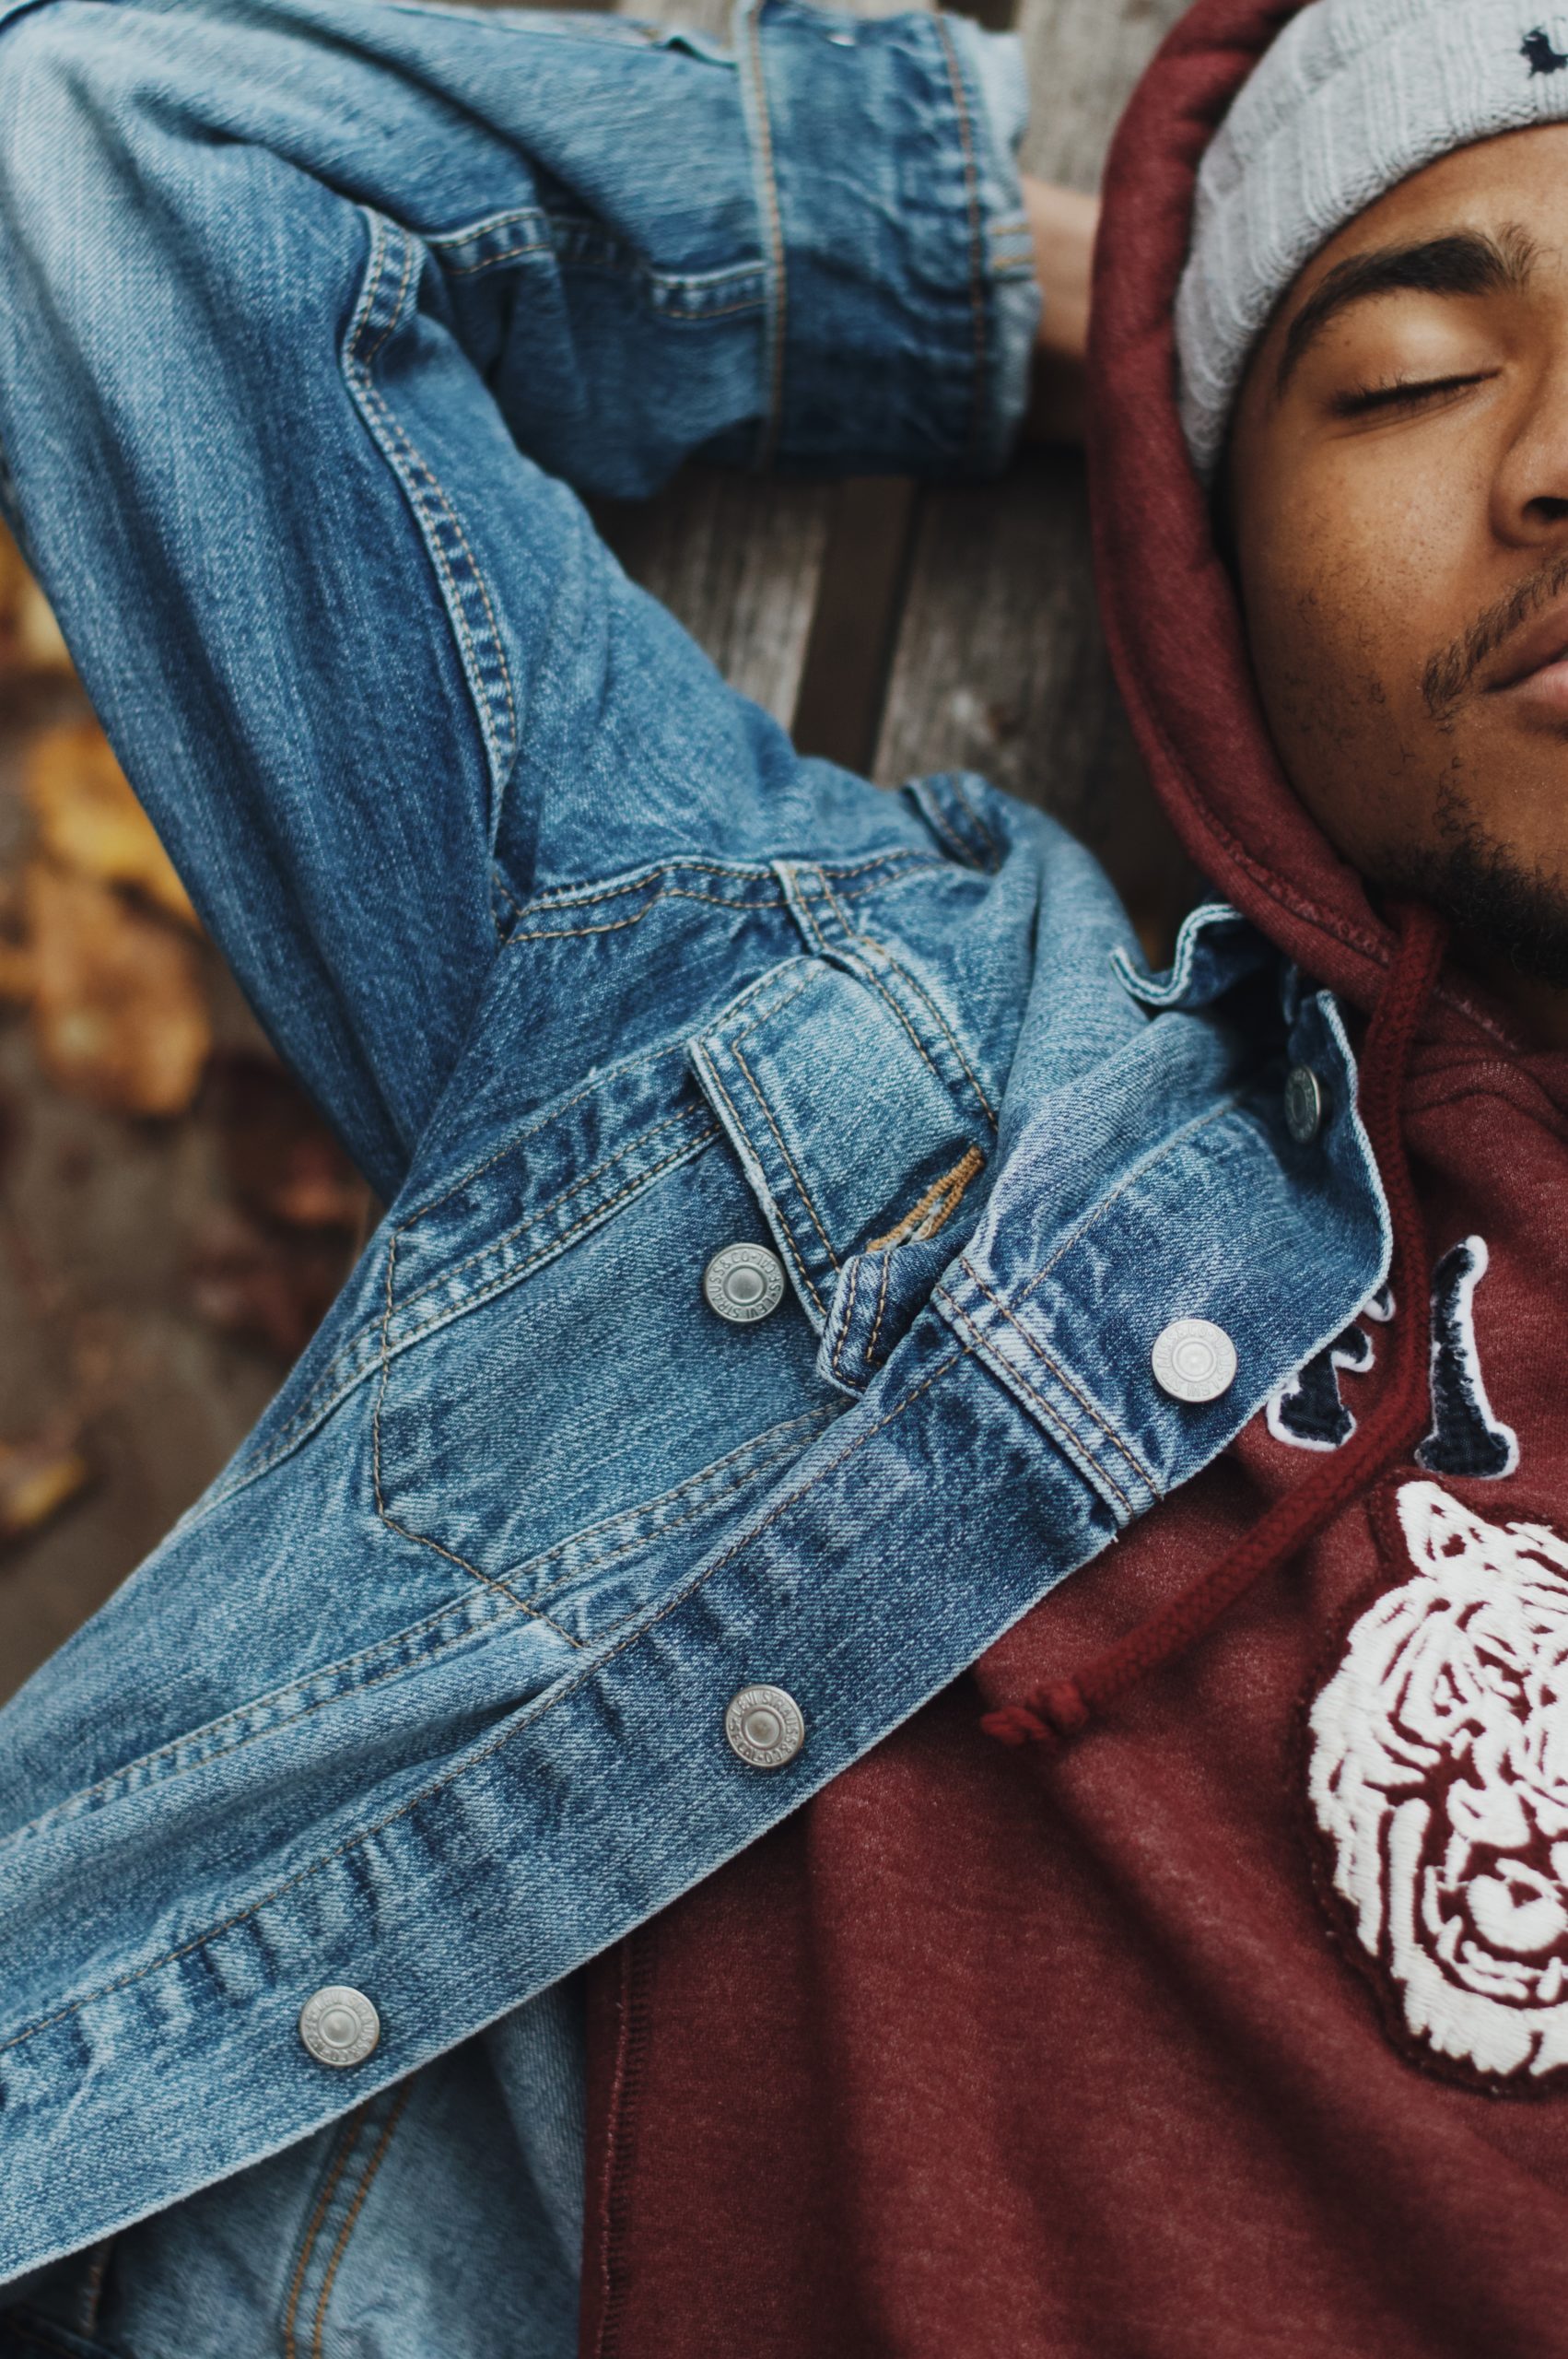 A black man wearing a red hoodie and jean jacket lying down on a park bench. Fallen leaves are in the background out of focus.